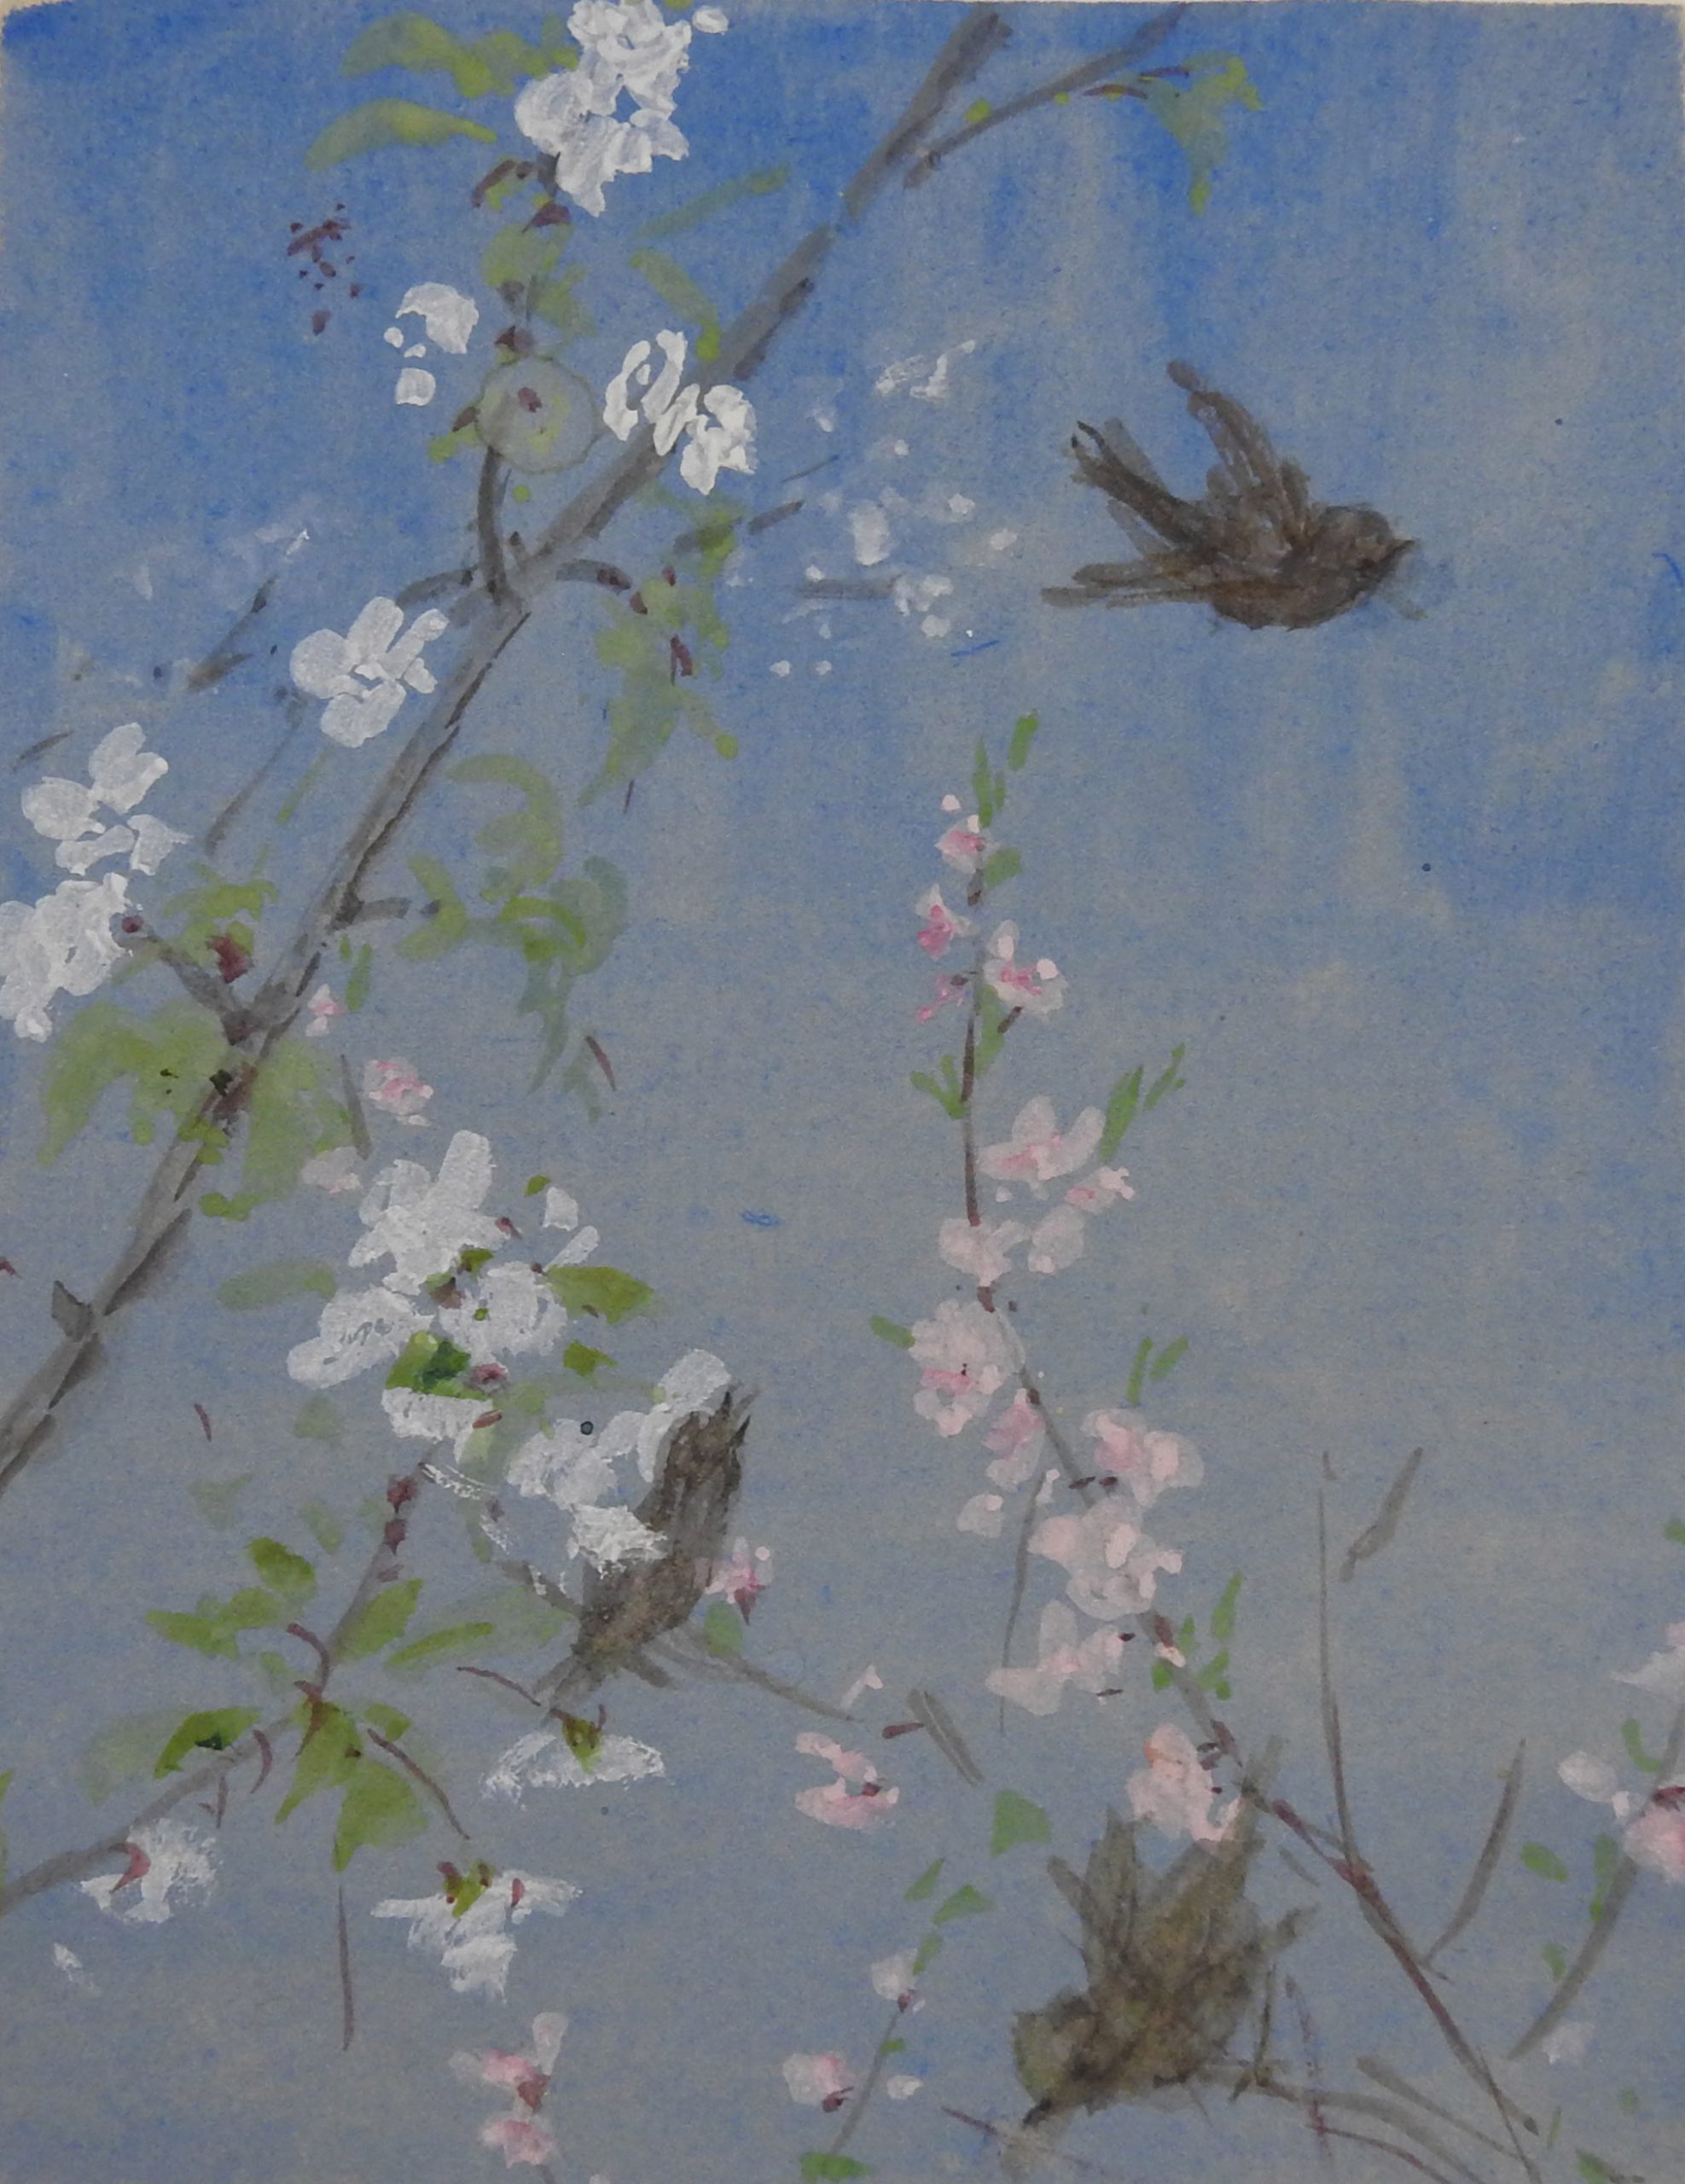 Three birds among blossoms with a blue sky.